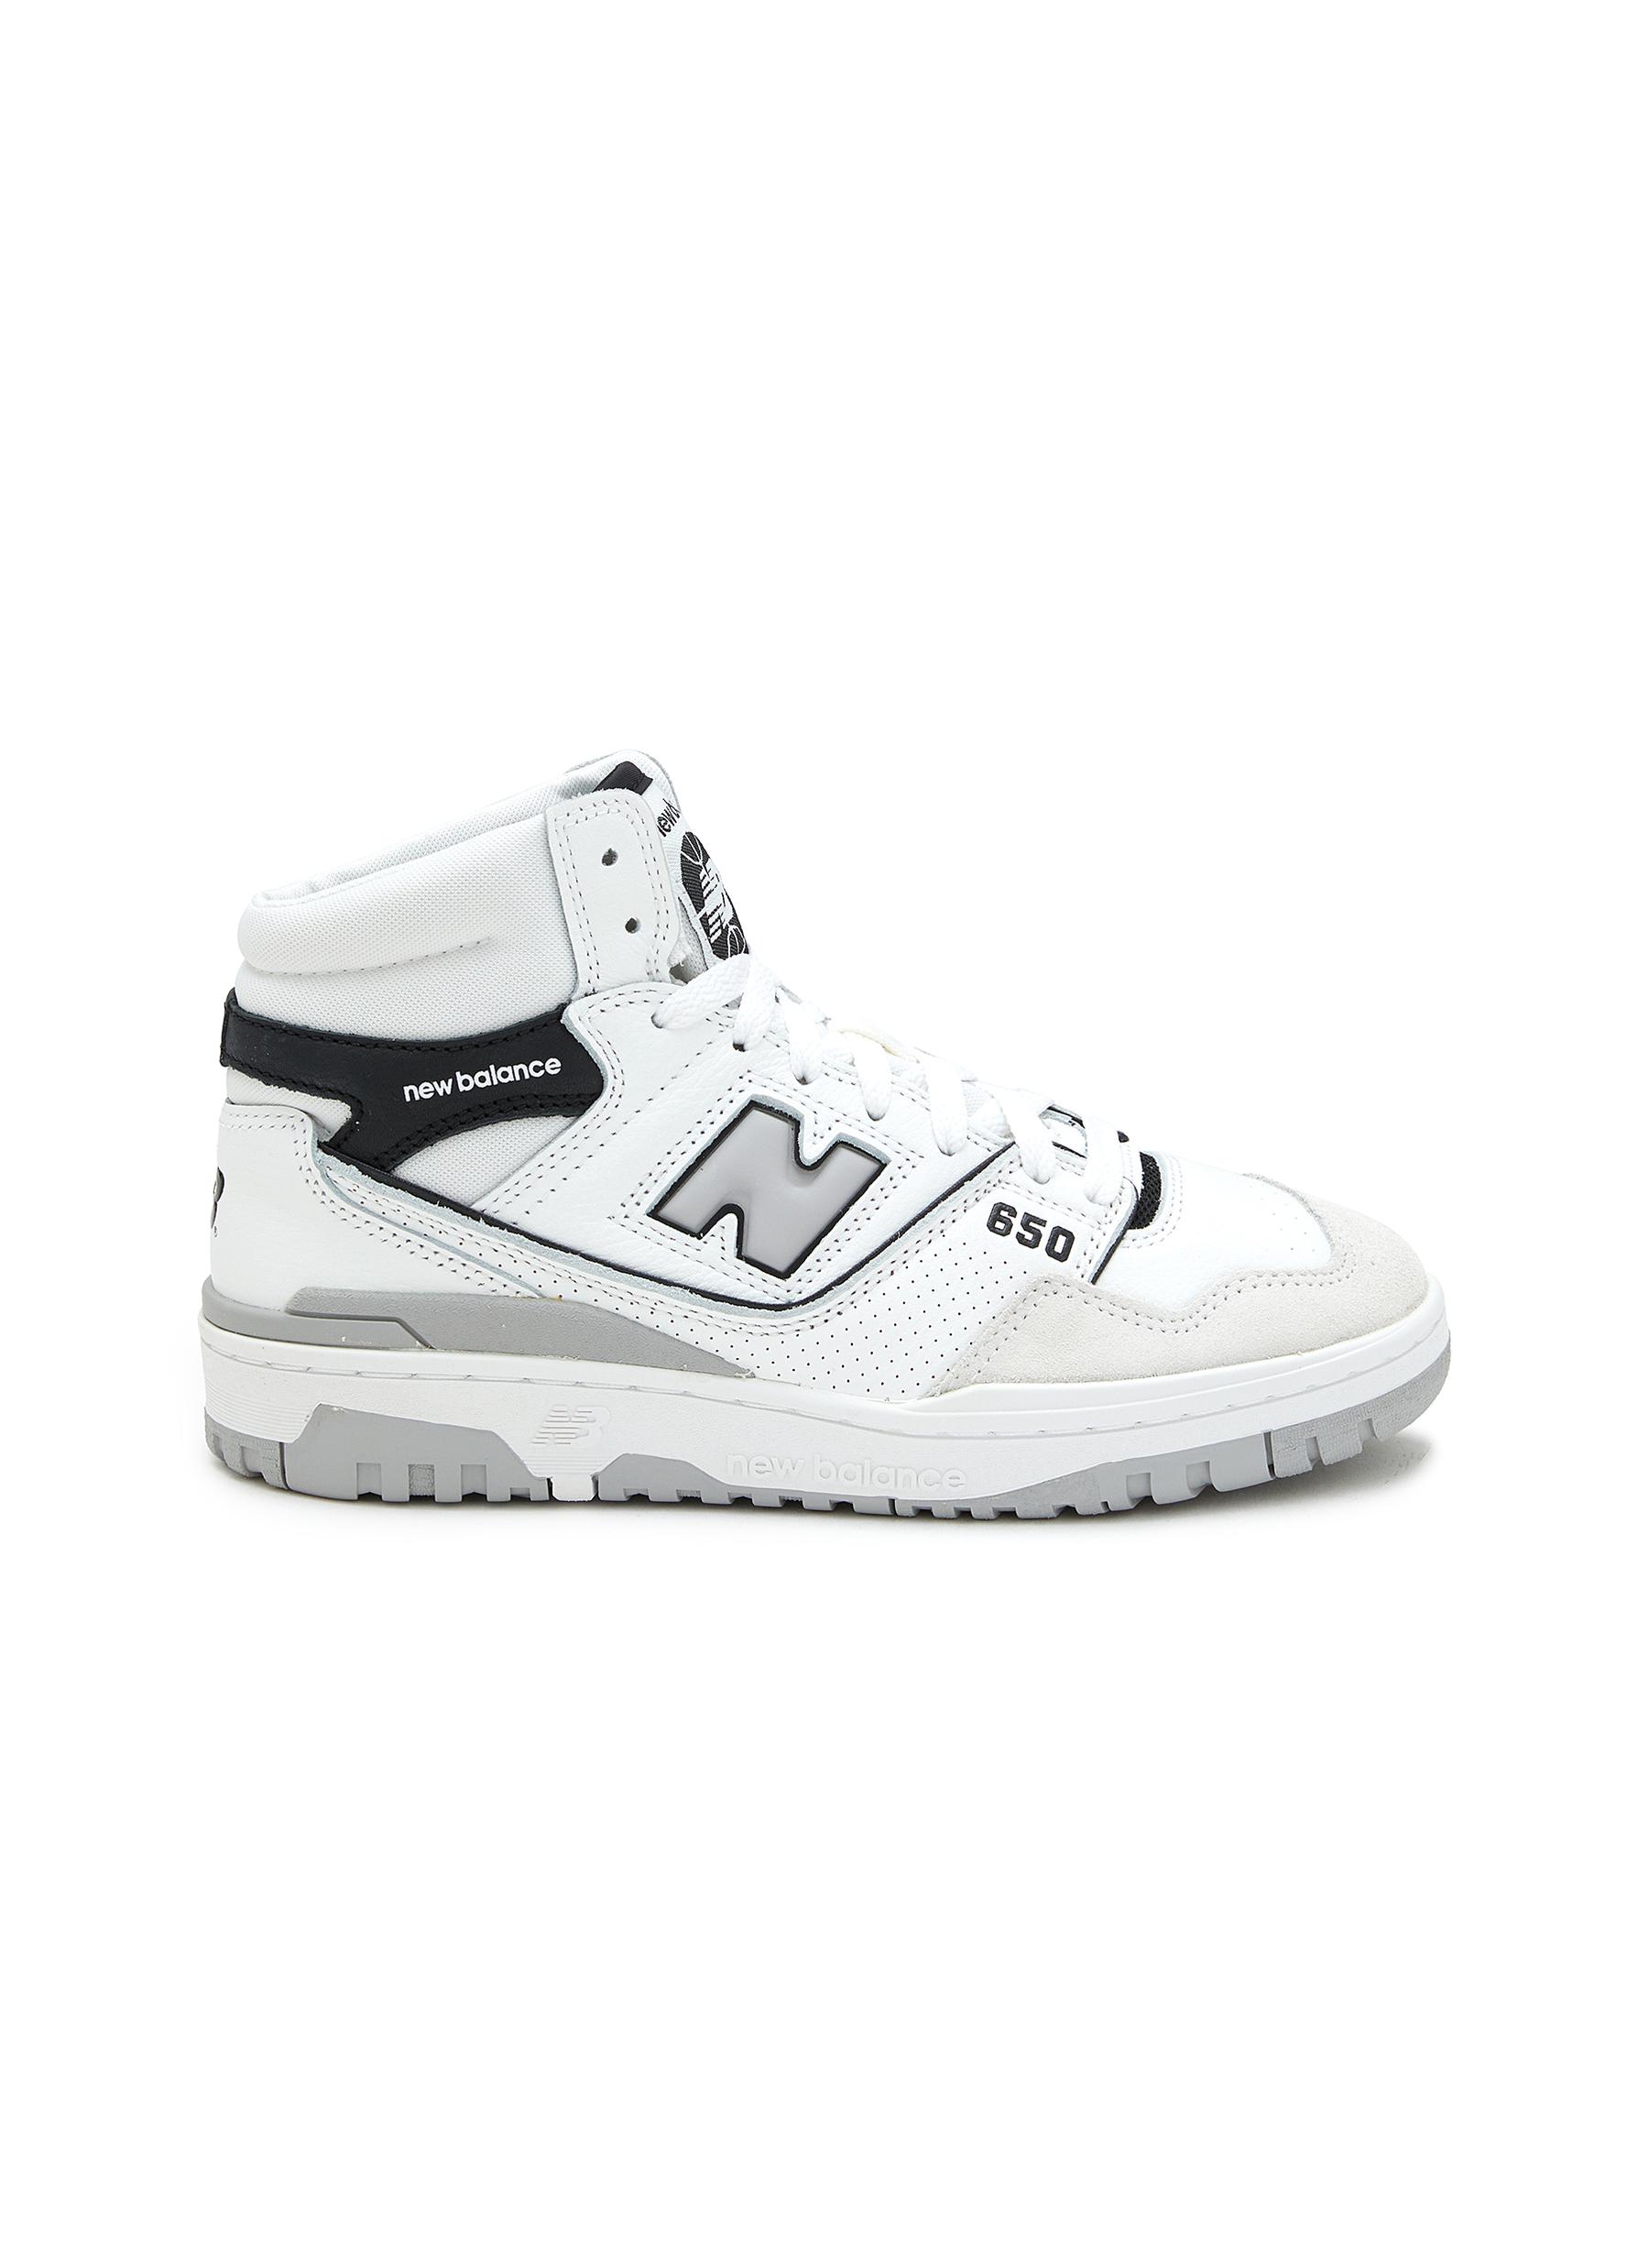 NEW BALANCE, 650 Leather High Top Sneakers, Women